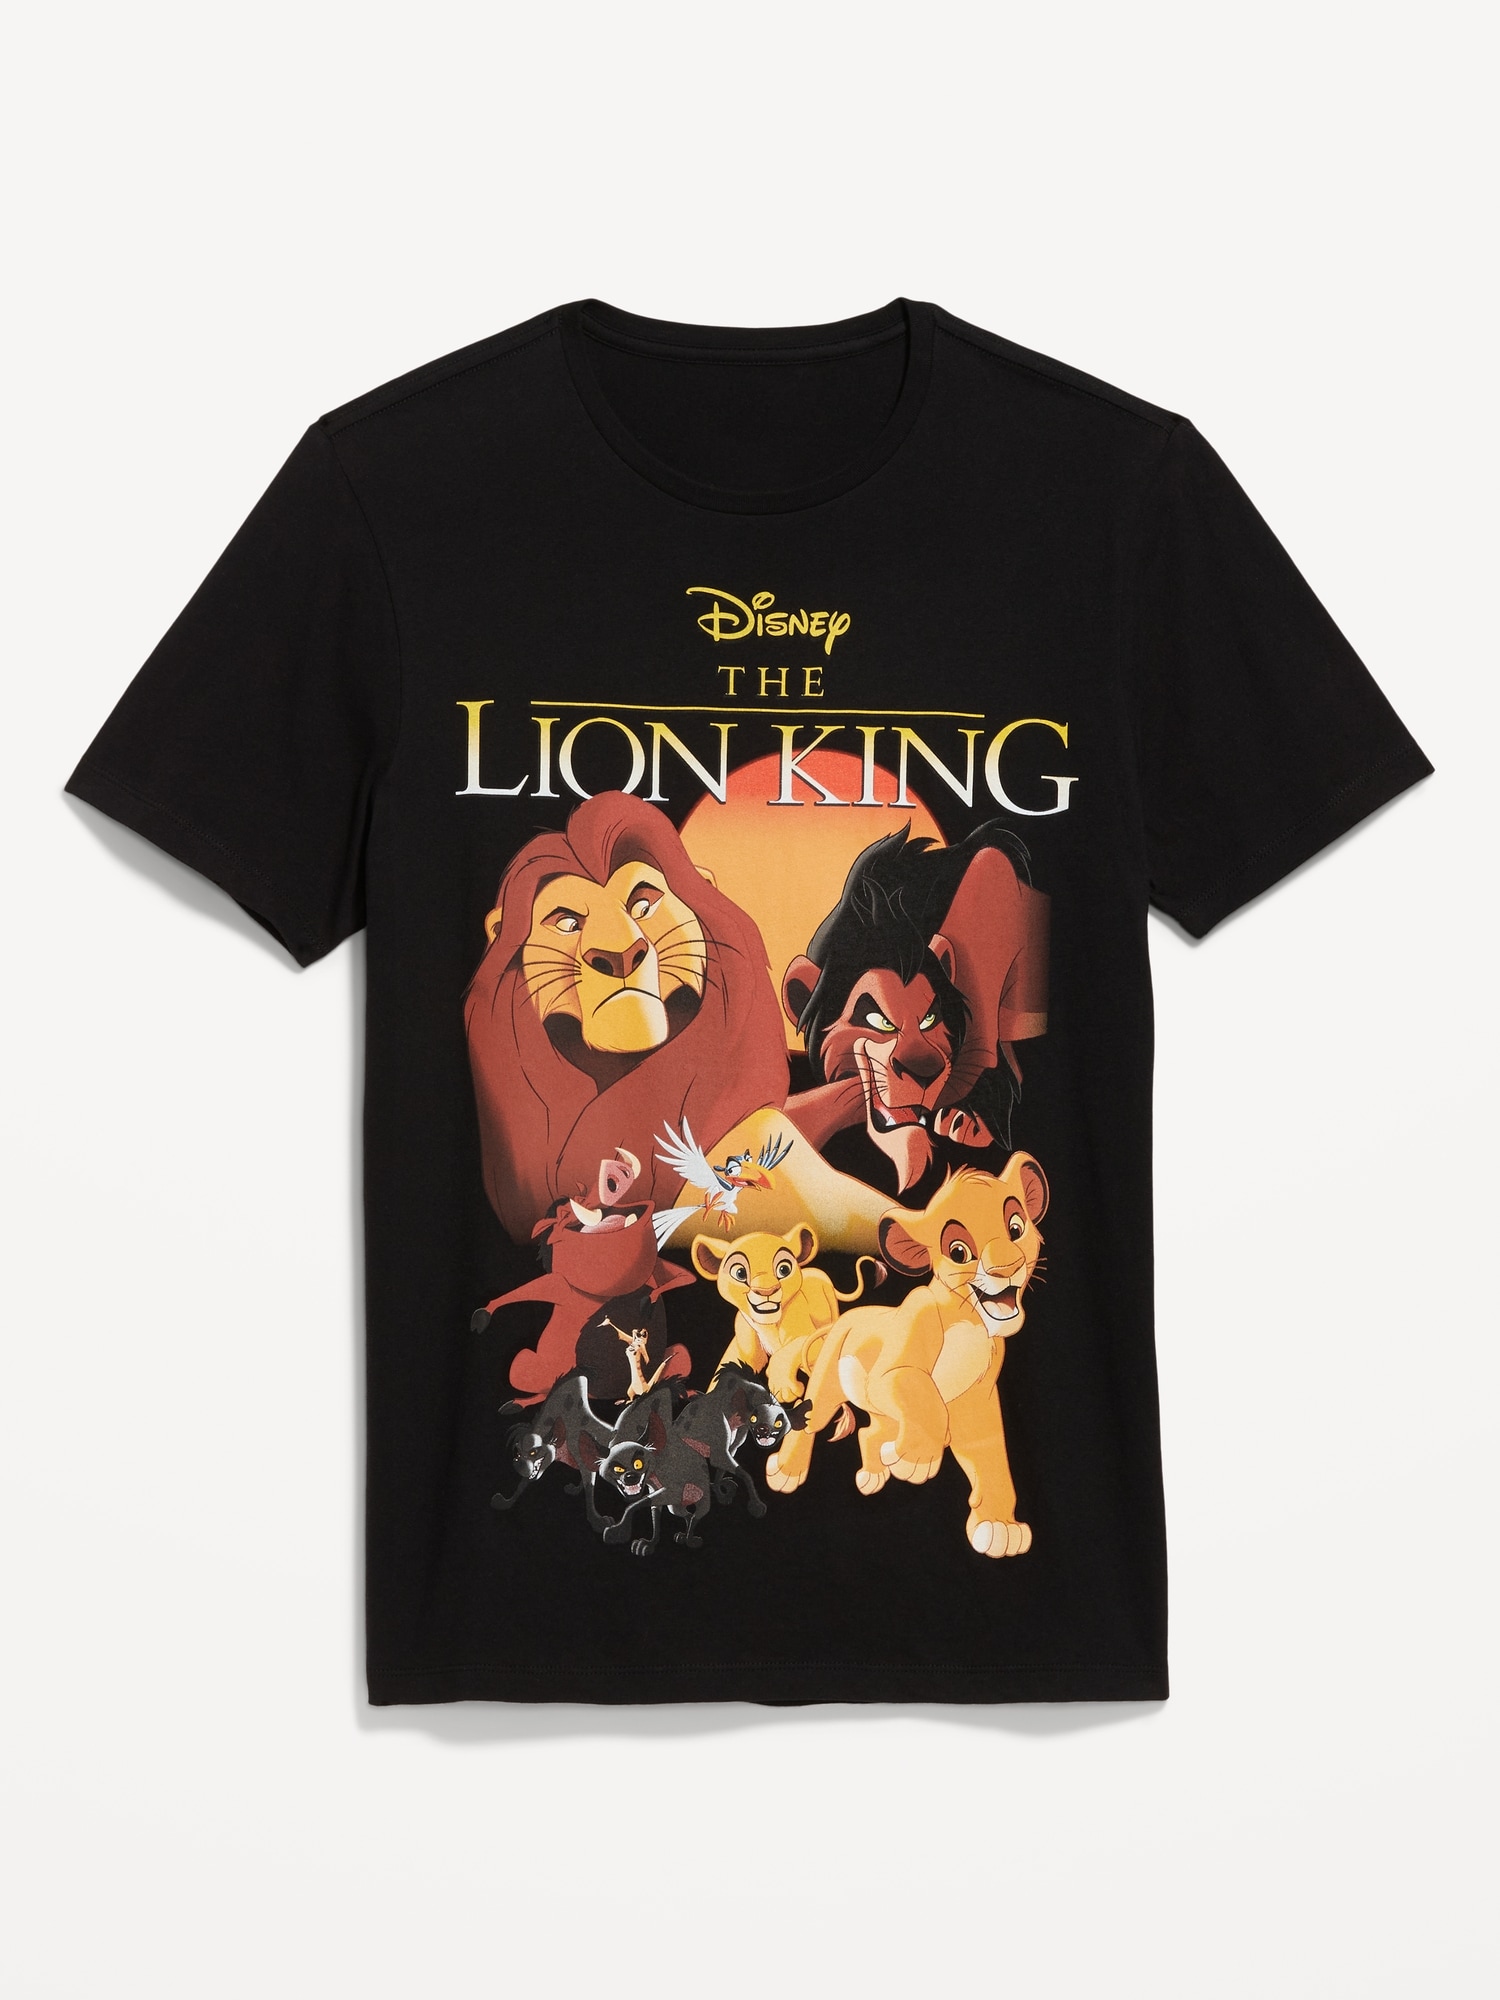 Disneyⓒ The Lion King Gender-Neutral T-Shirt for Adults